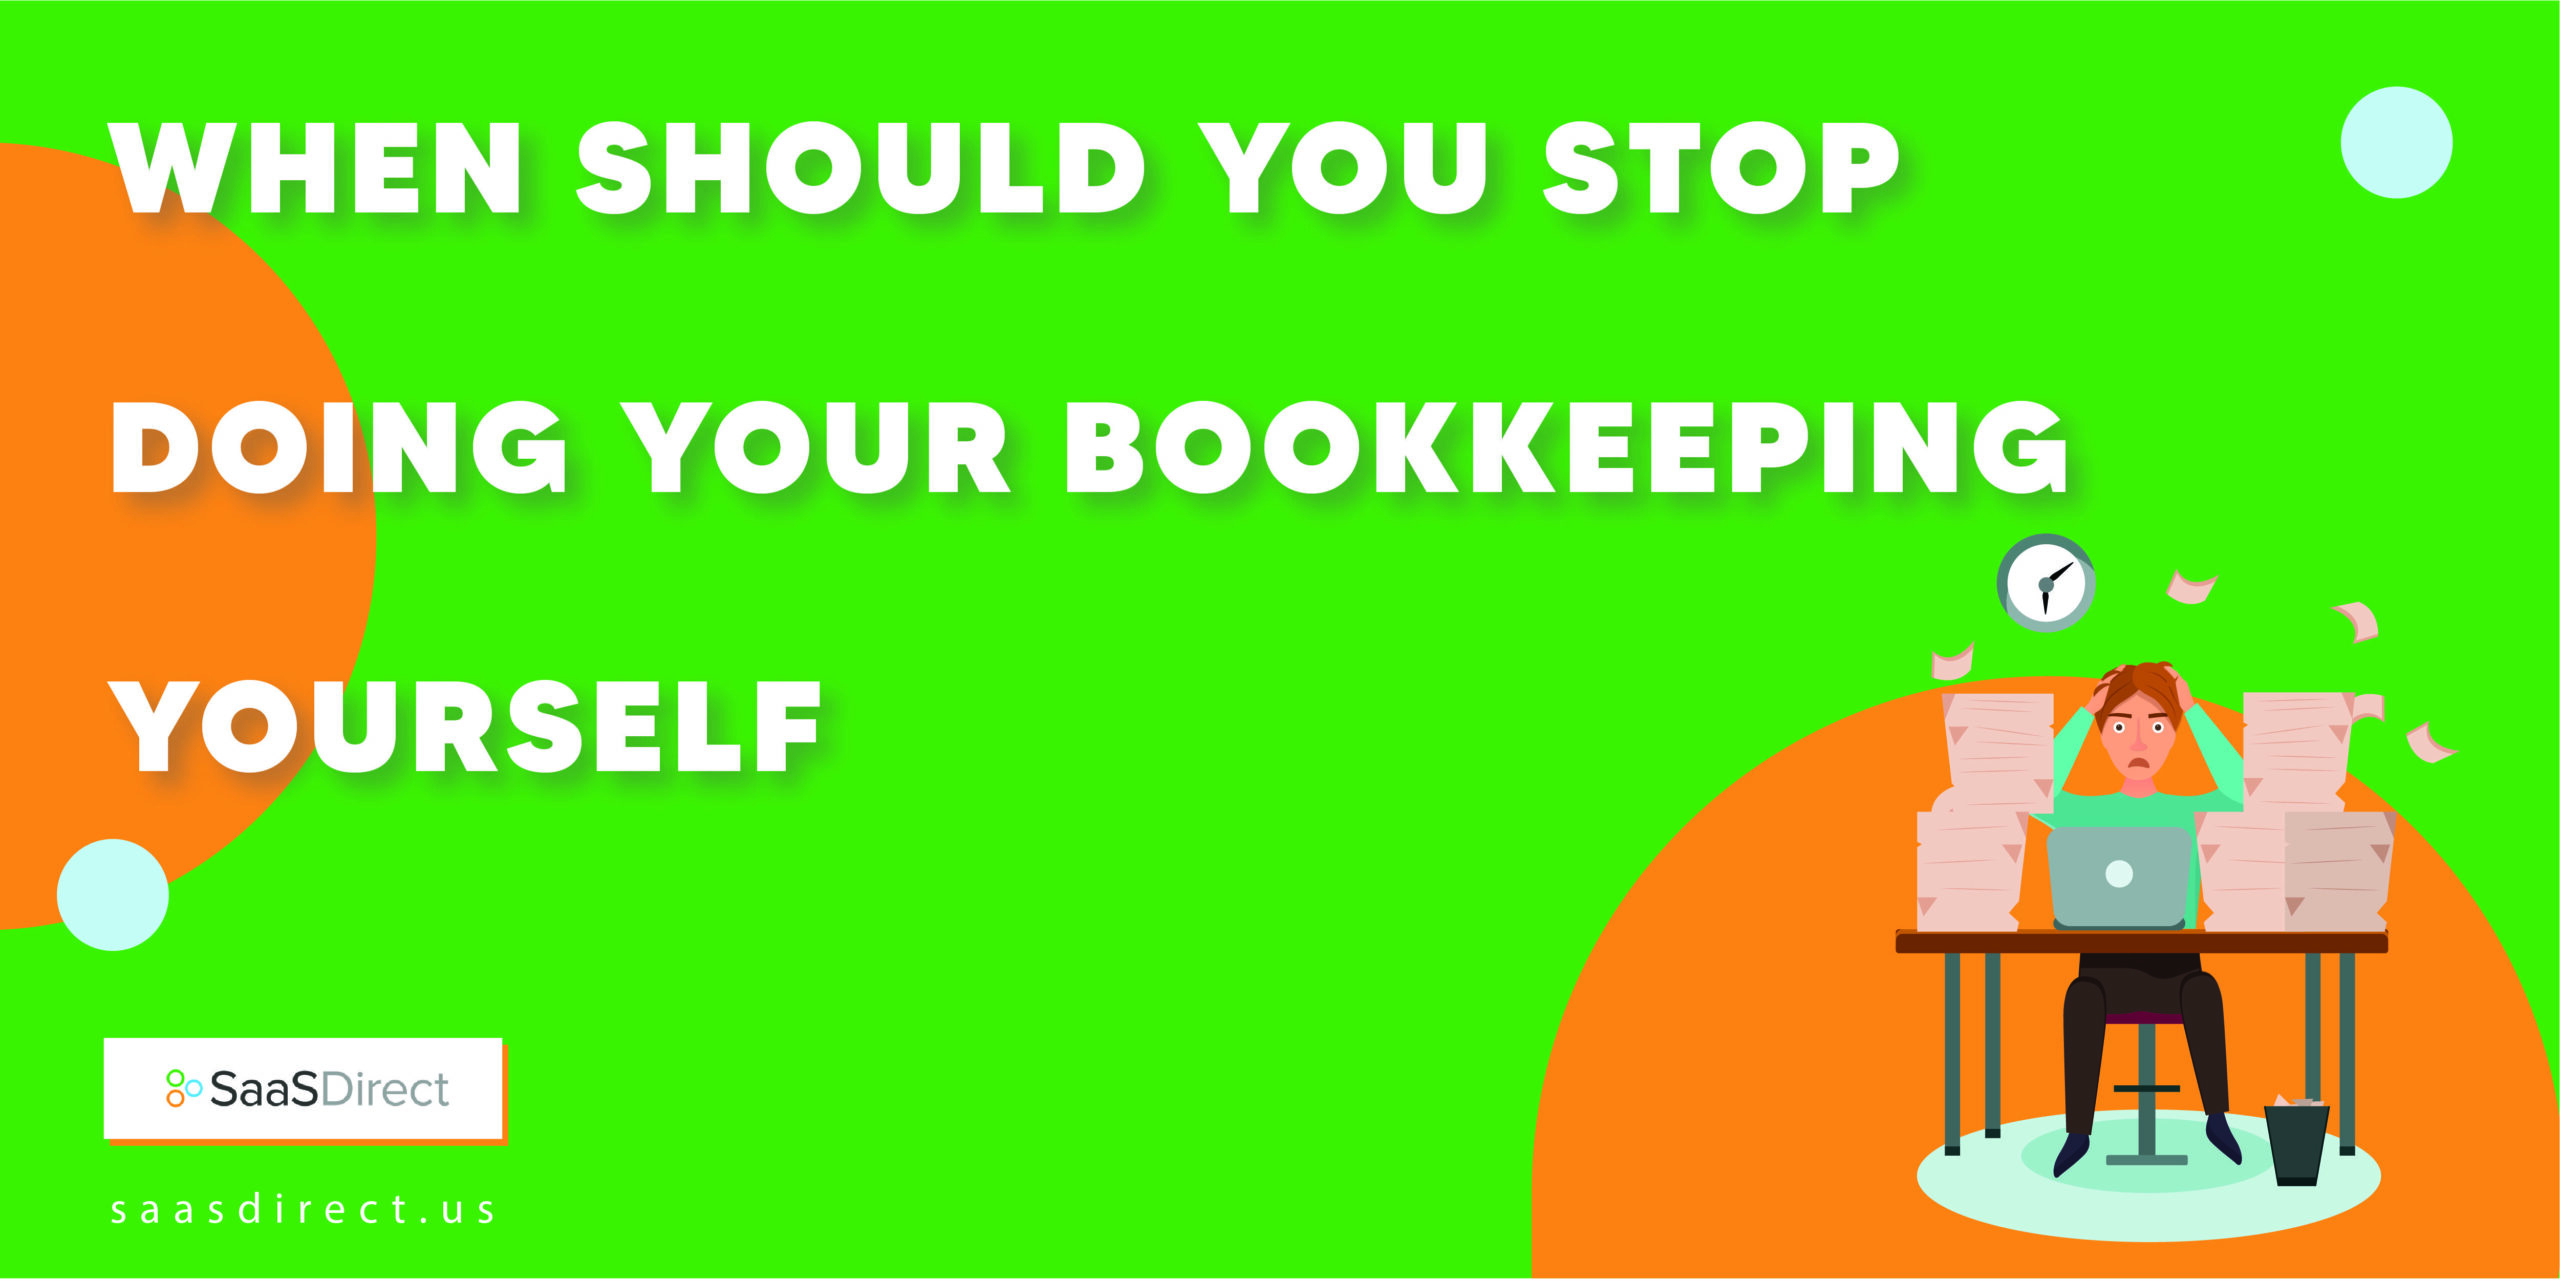 When Should You Stop Doing Your Bookkeeping Yourself?